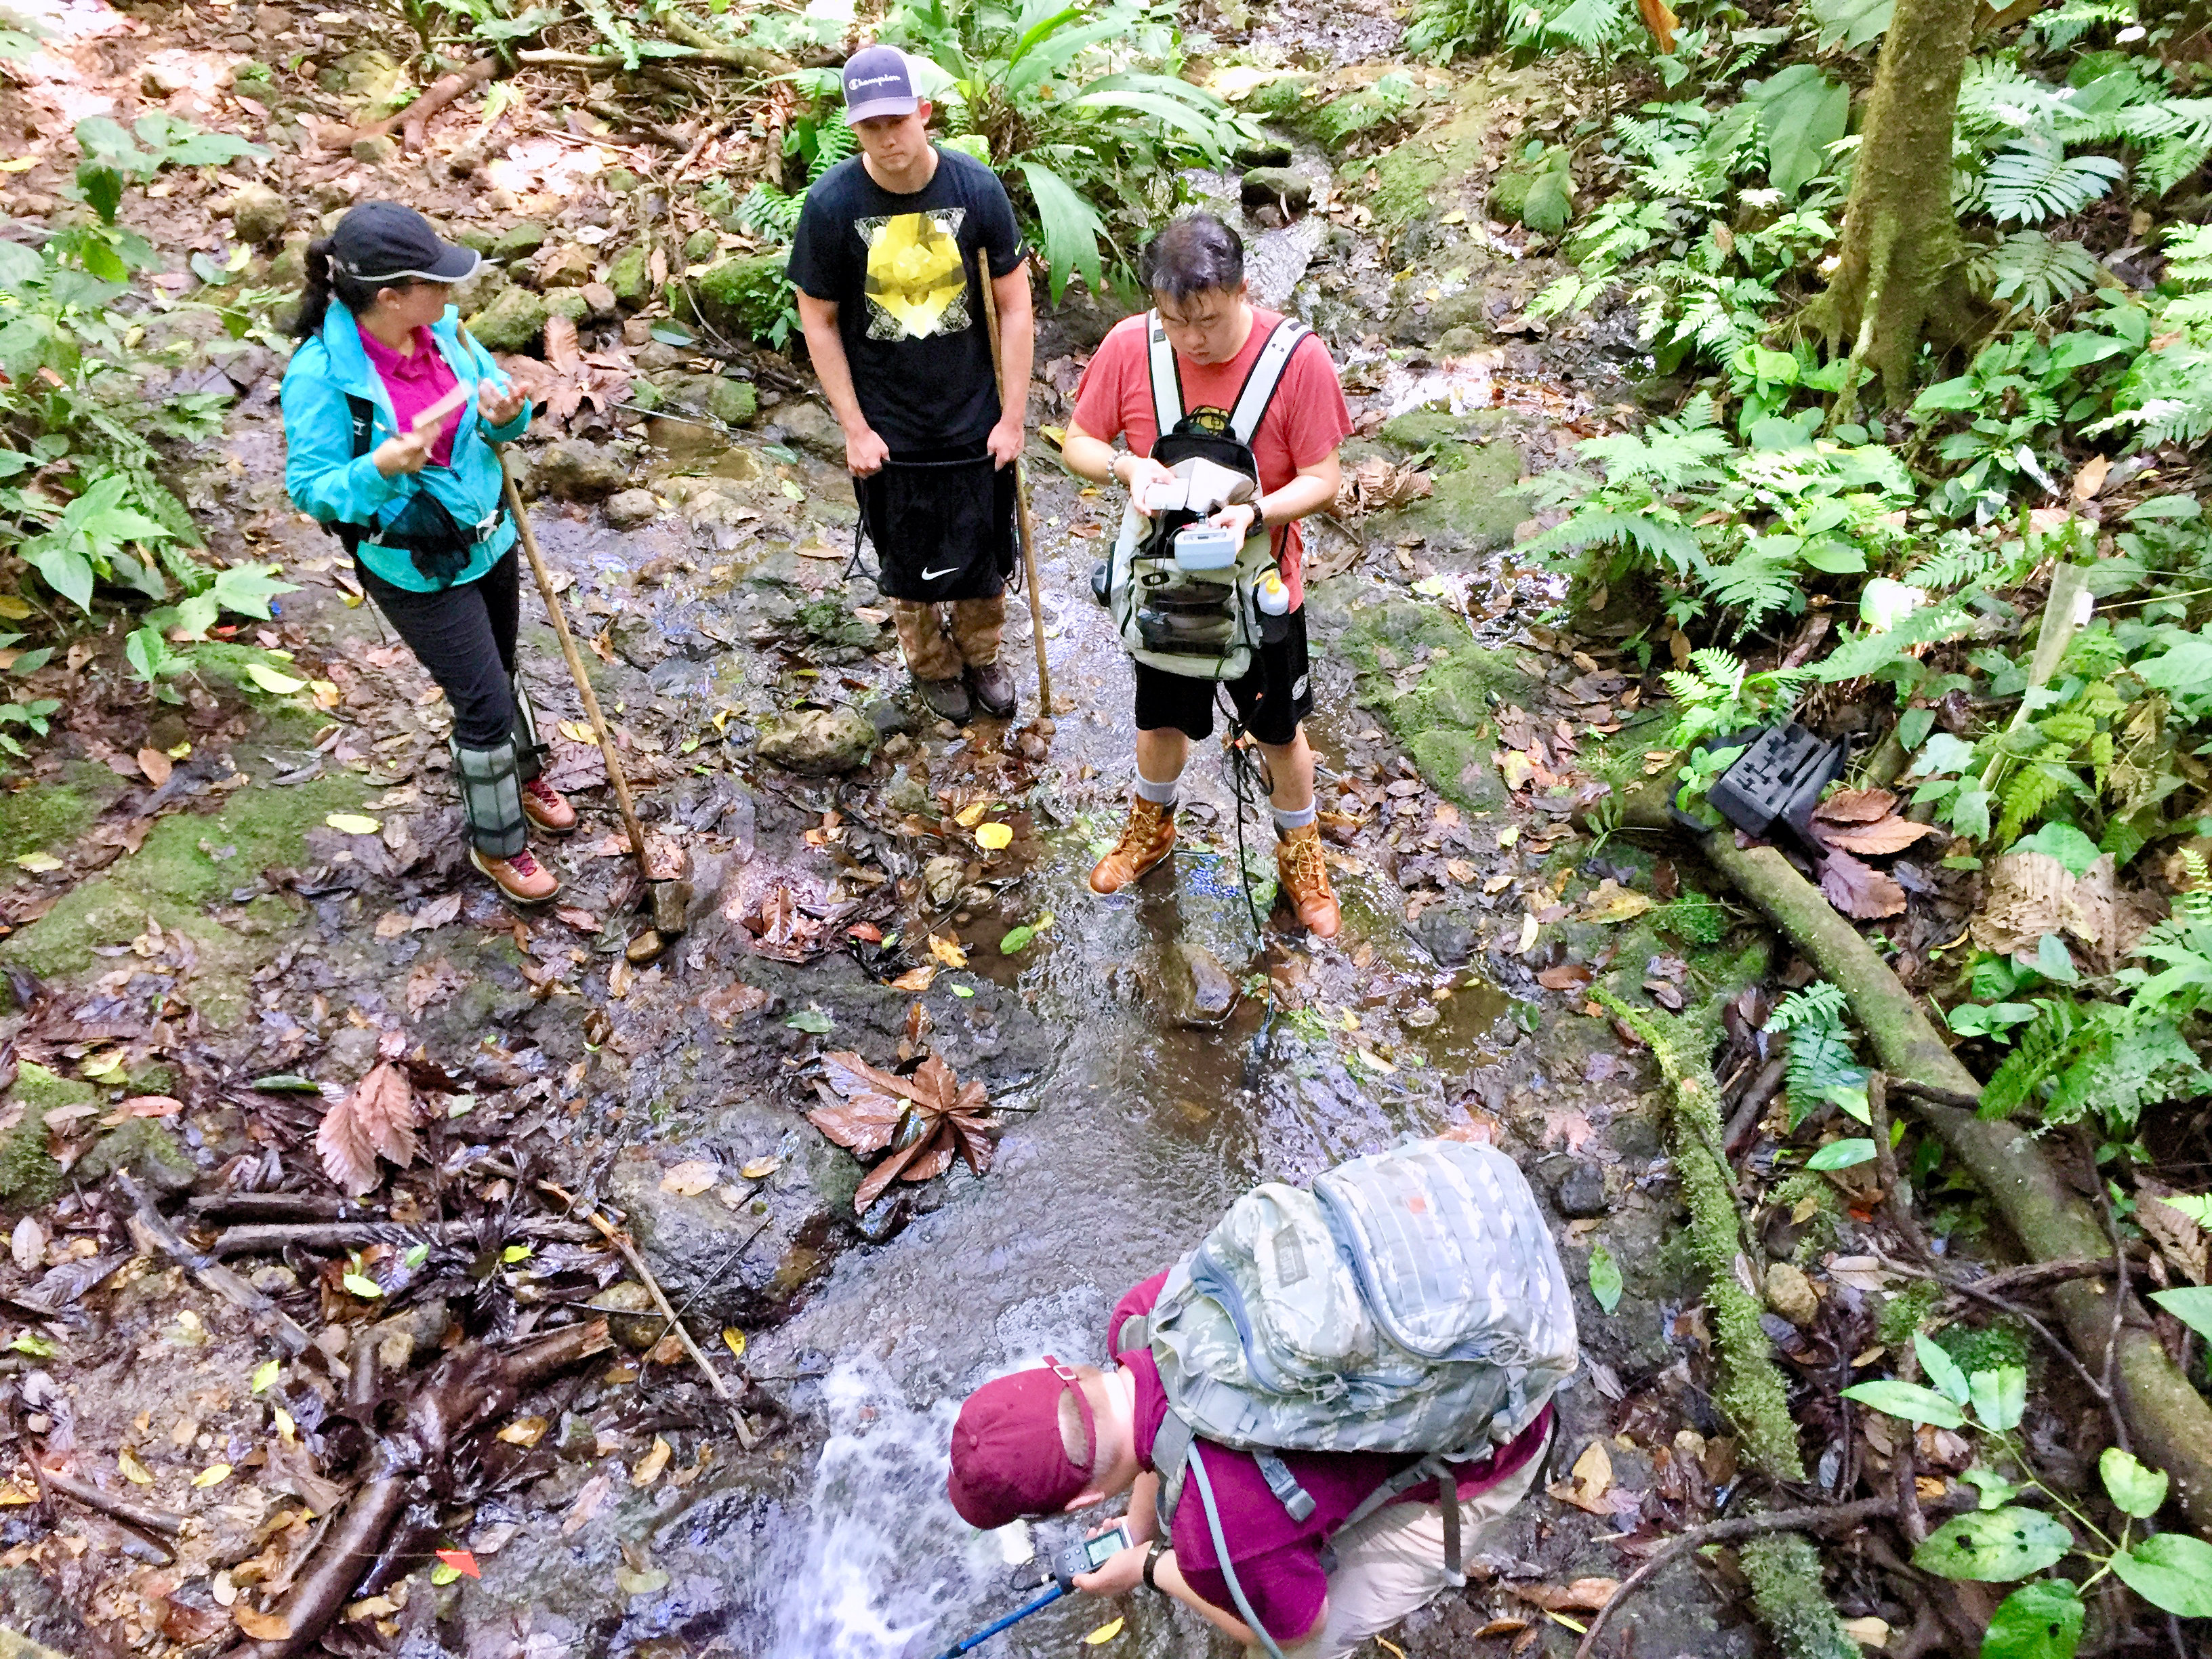 The stream group measuring temperature, dissolved oxygen, and pH.